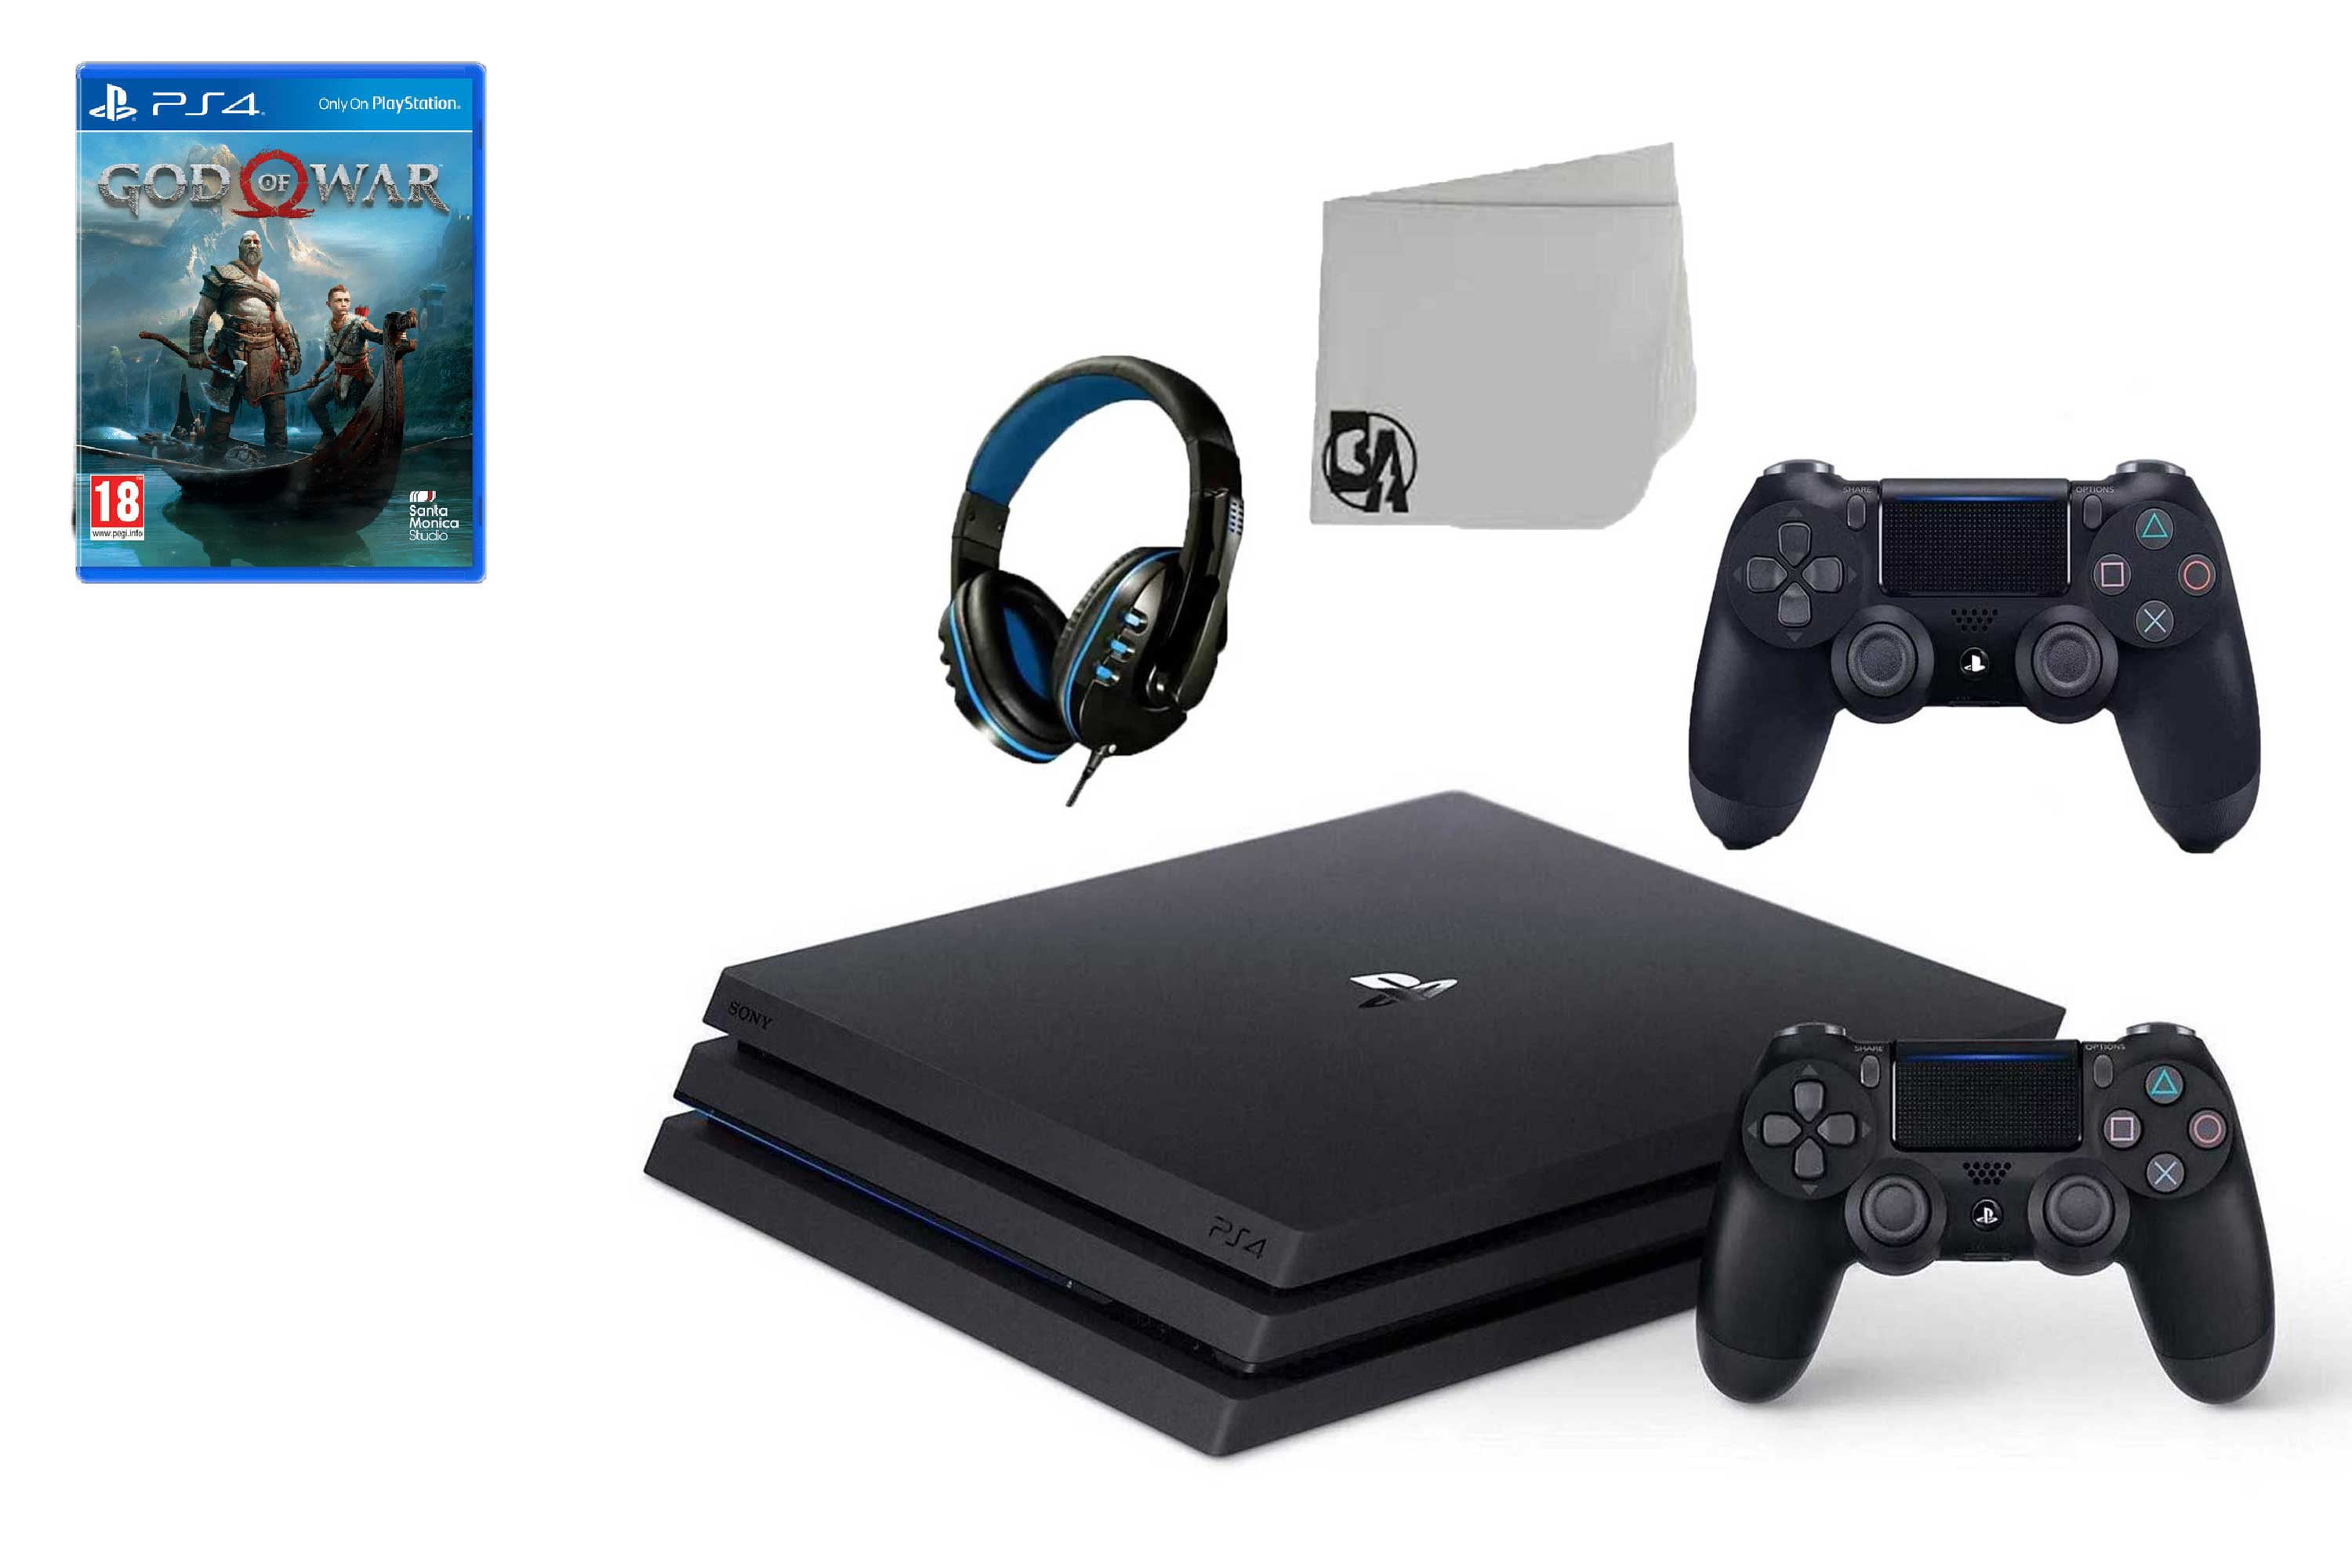 Sony PlayStation 4 Pro 1TB Gaming Black 2 Controller Included with FIFA-19 BOLT AXTION Bundle Walmart.com